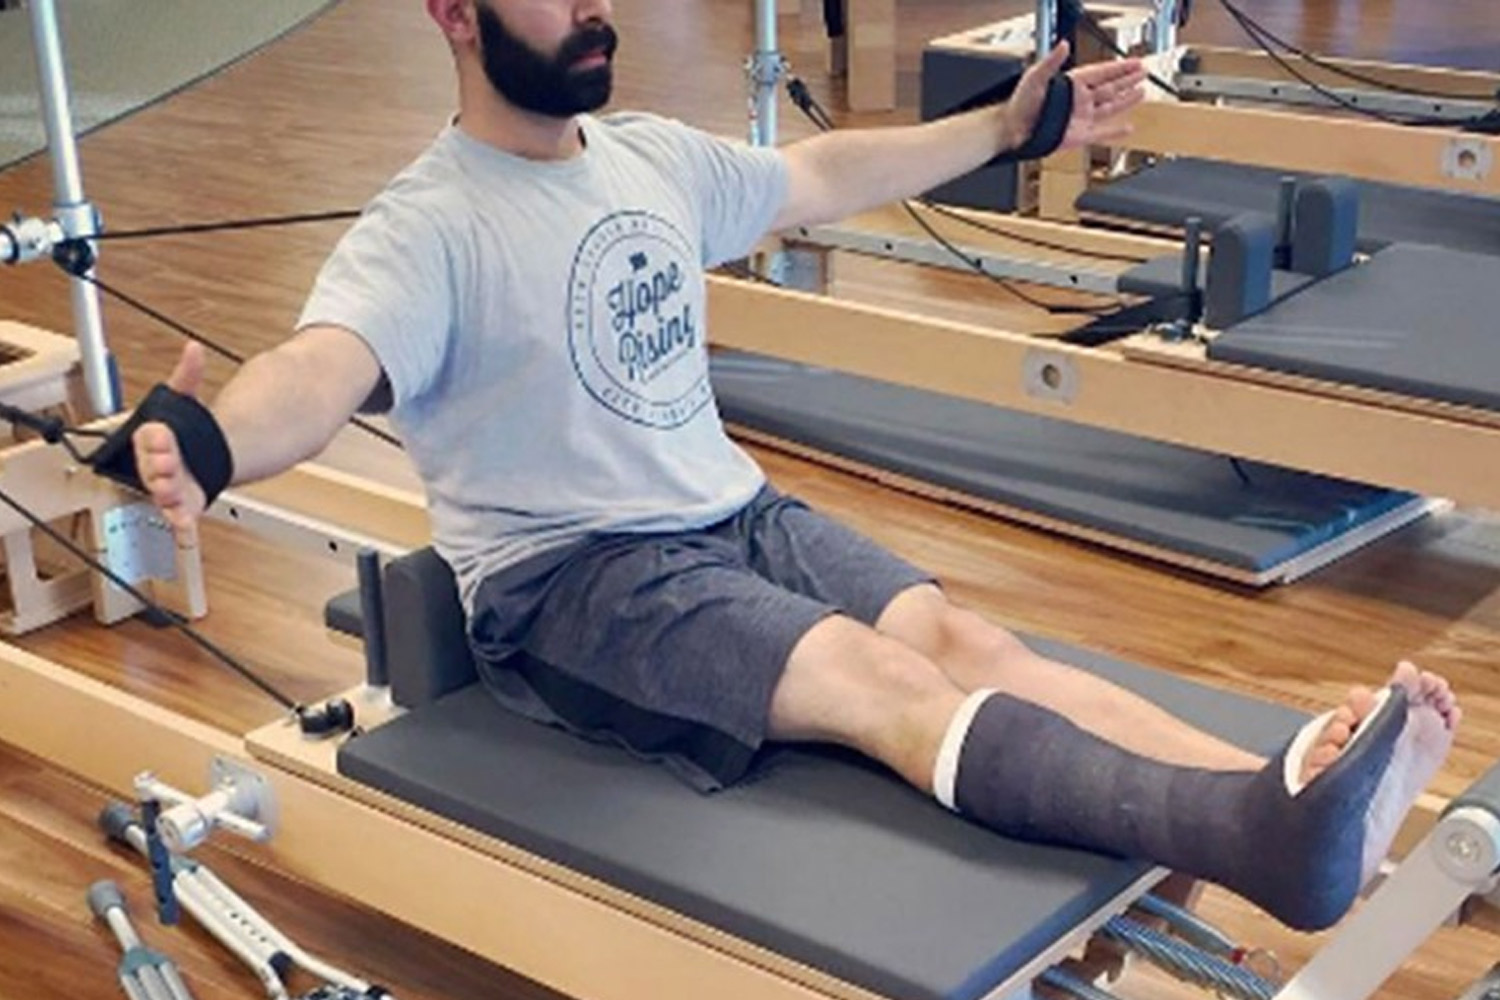 BENEFITS OF REFORMER PILATES FOR INJURIES: